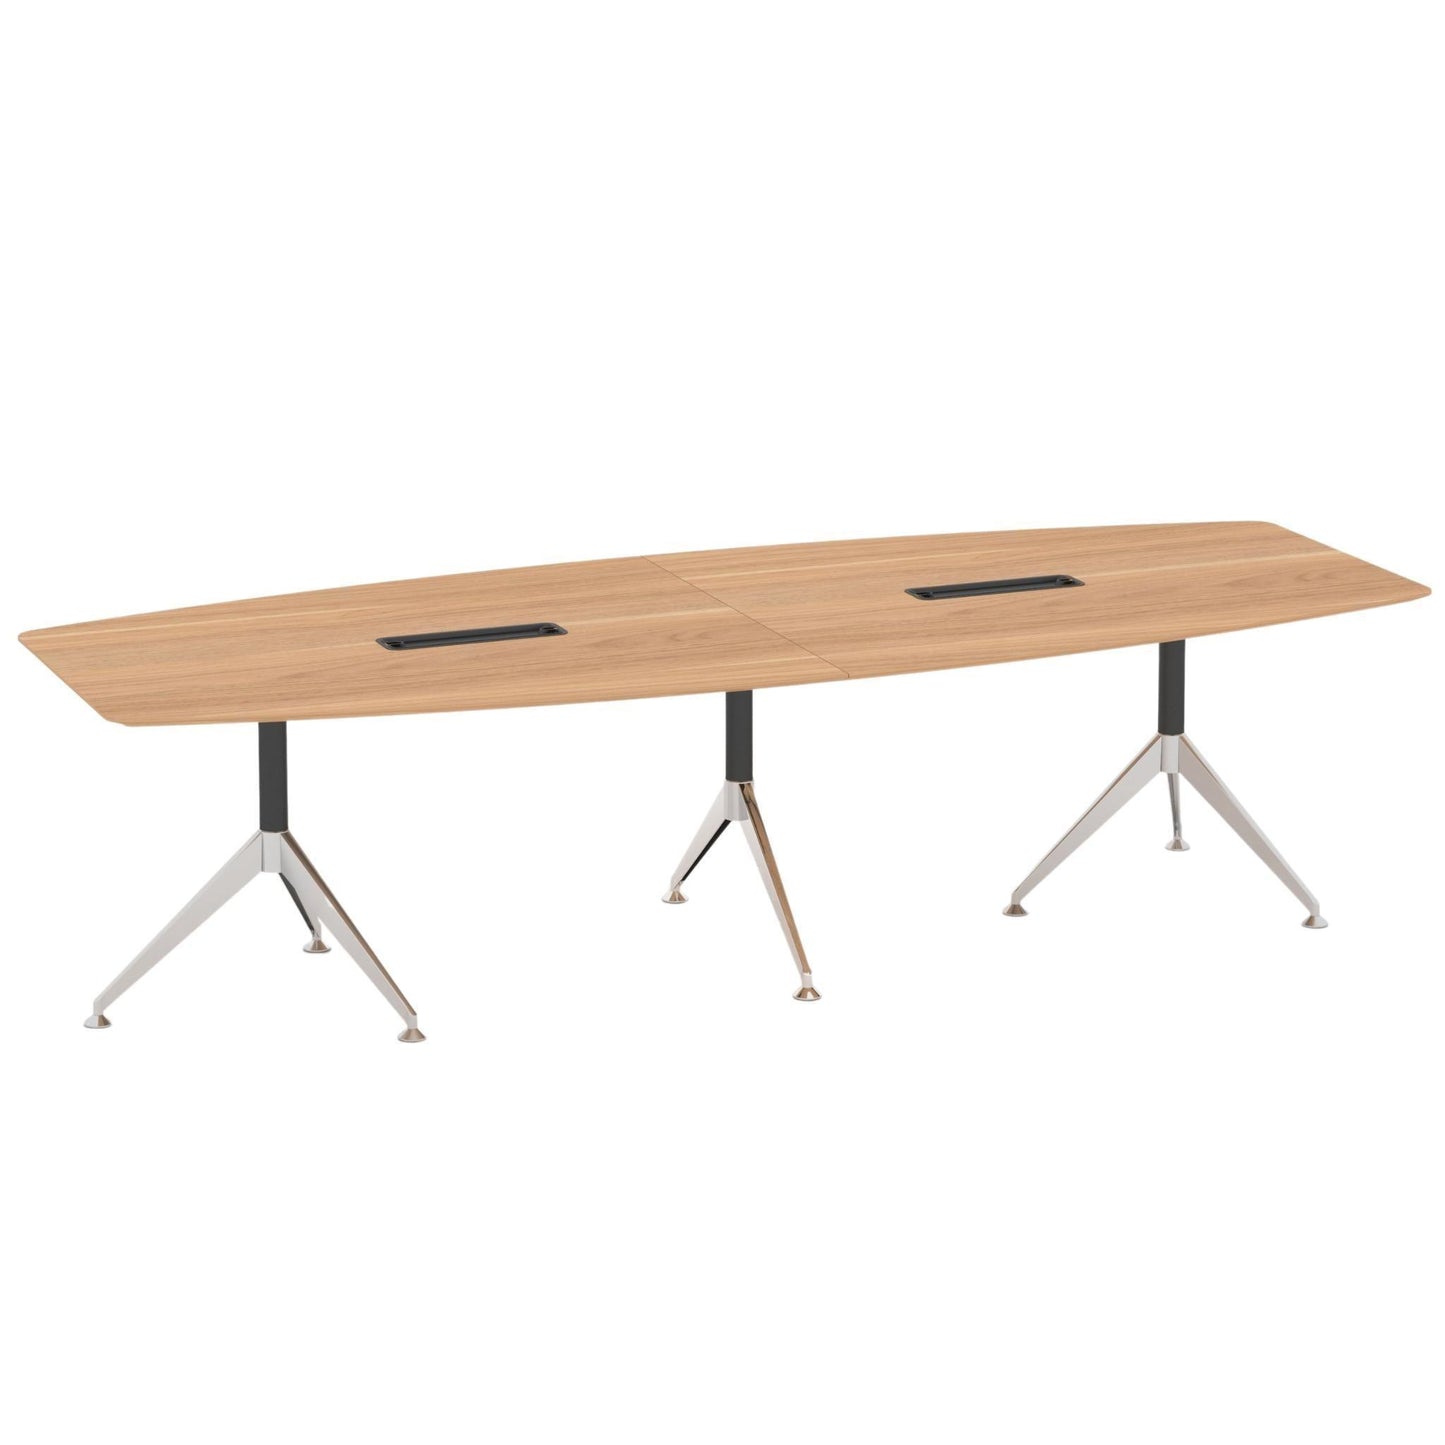 Potenza Boardroom & Meeting Table - Office Furniture Company 